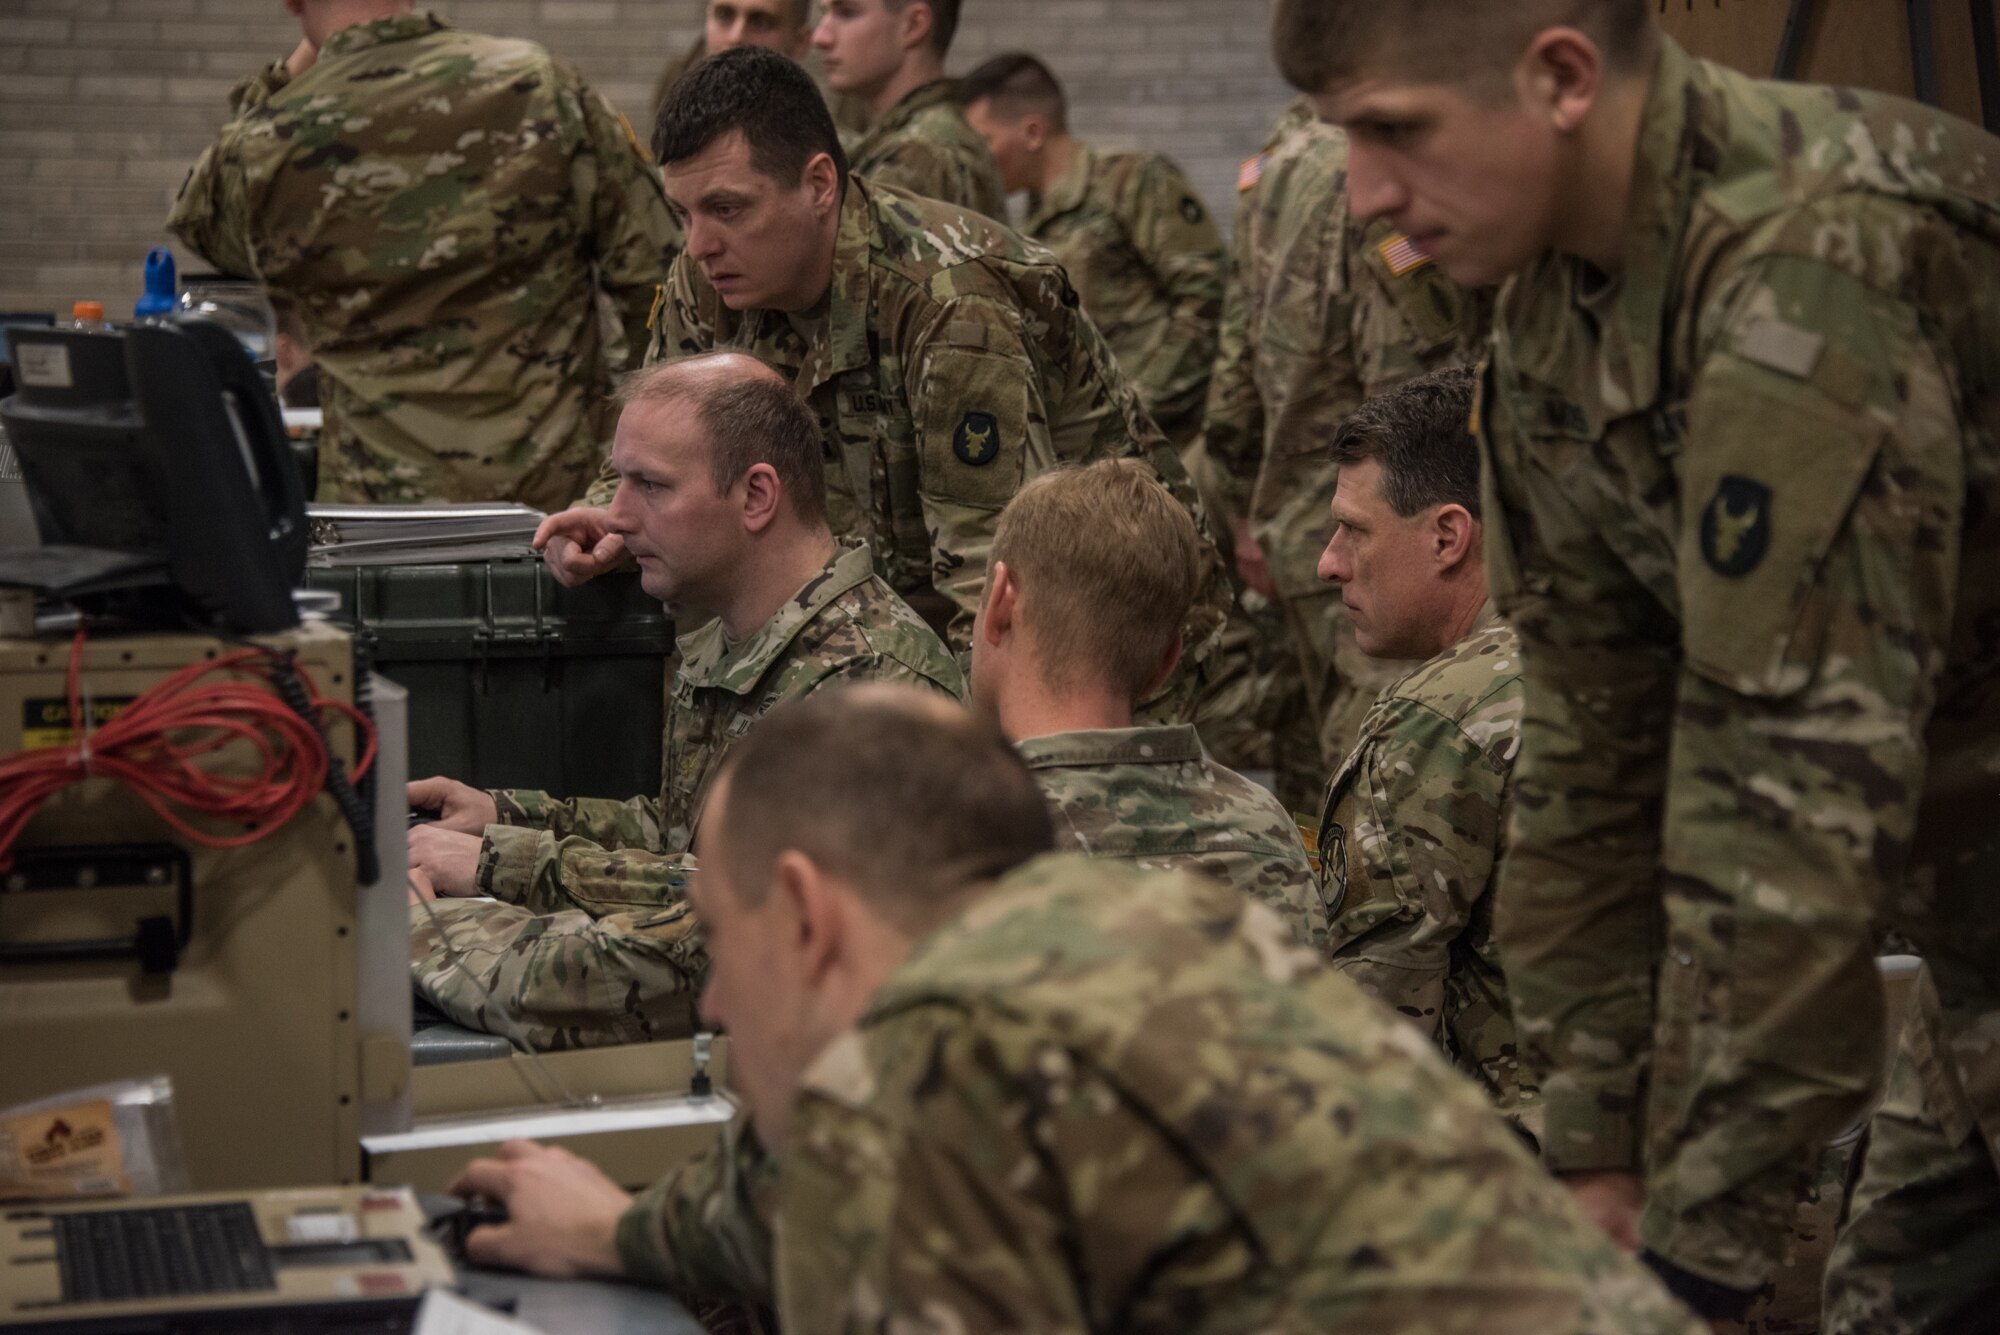 Members of the Army National Guard Armored Brigade Combat Team, 34th Infantry Division (1/34th ABCT), look at computers where a simulated battle is happening in real-time during the 19-05 Command Post Exercise (CPX) for the 1/34th ABCT, March 8-9, 2019, at Camp Ripley in Little Falls, Minn. The CPX was a practice virtual battle exercise for the brigade to practice their battle drills, and the 146th ASOS will continue partnering with the 1/34th ABCT later in the year to assist in a graded warfighter exercise, as well as other trainings next year. (U.S. Air National Guard photo by Staff Sgt. Brigette Waltermire)